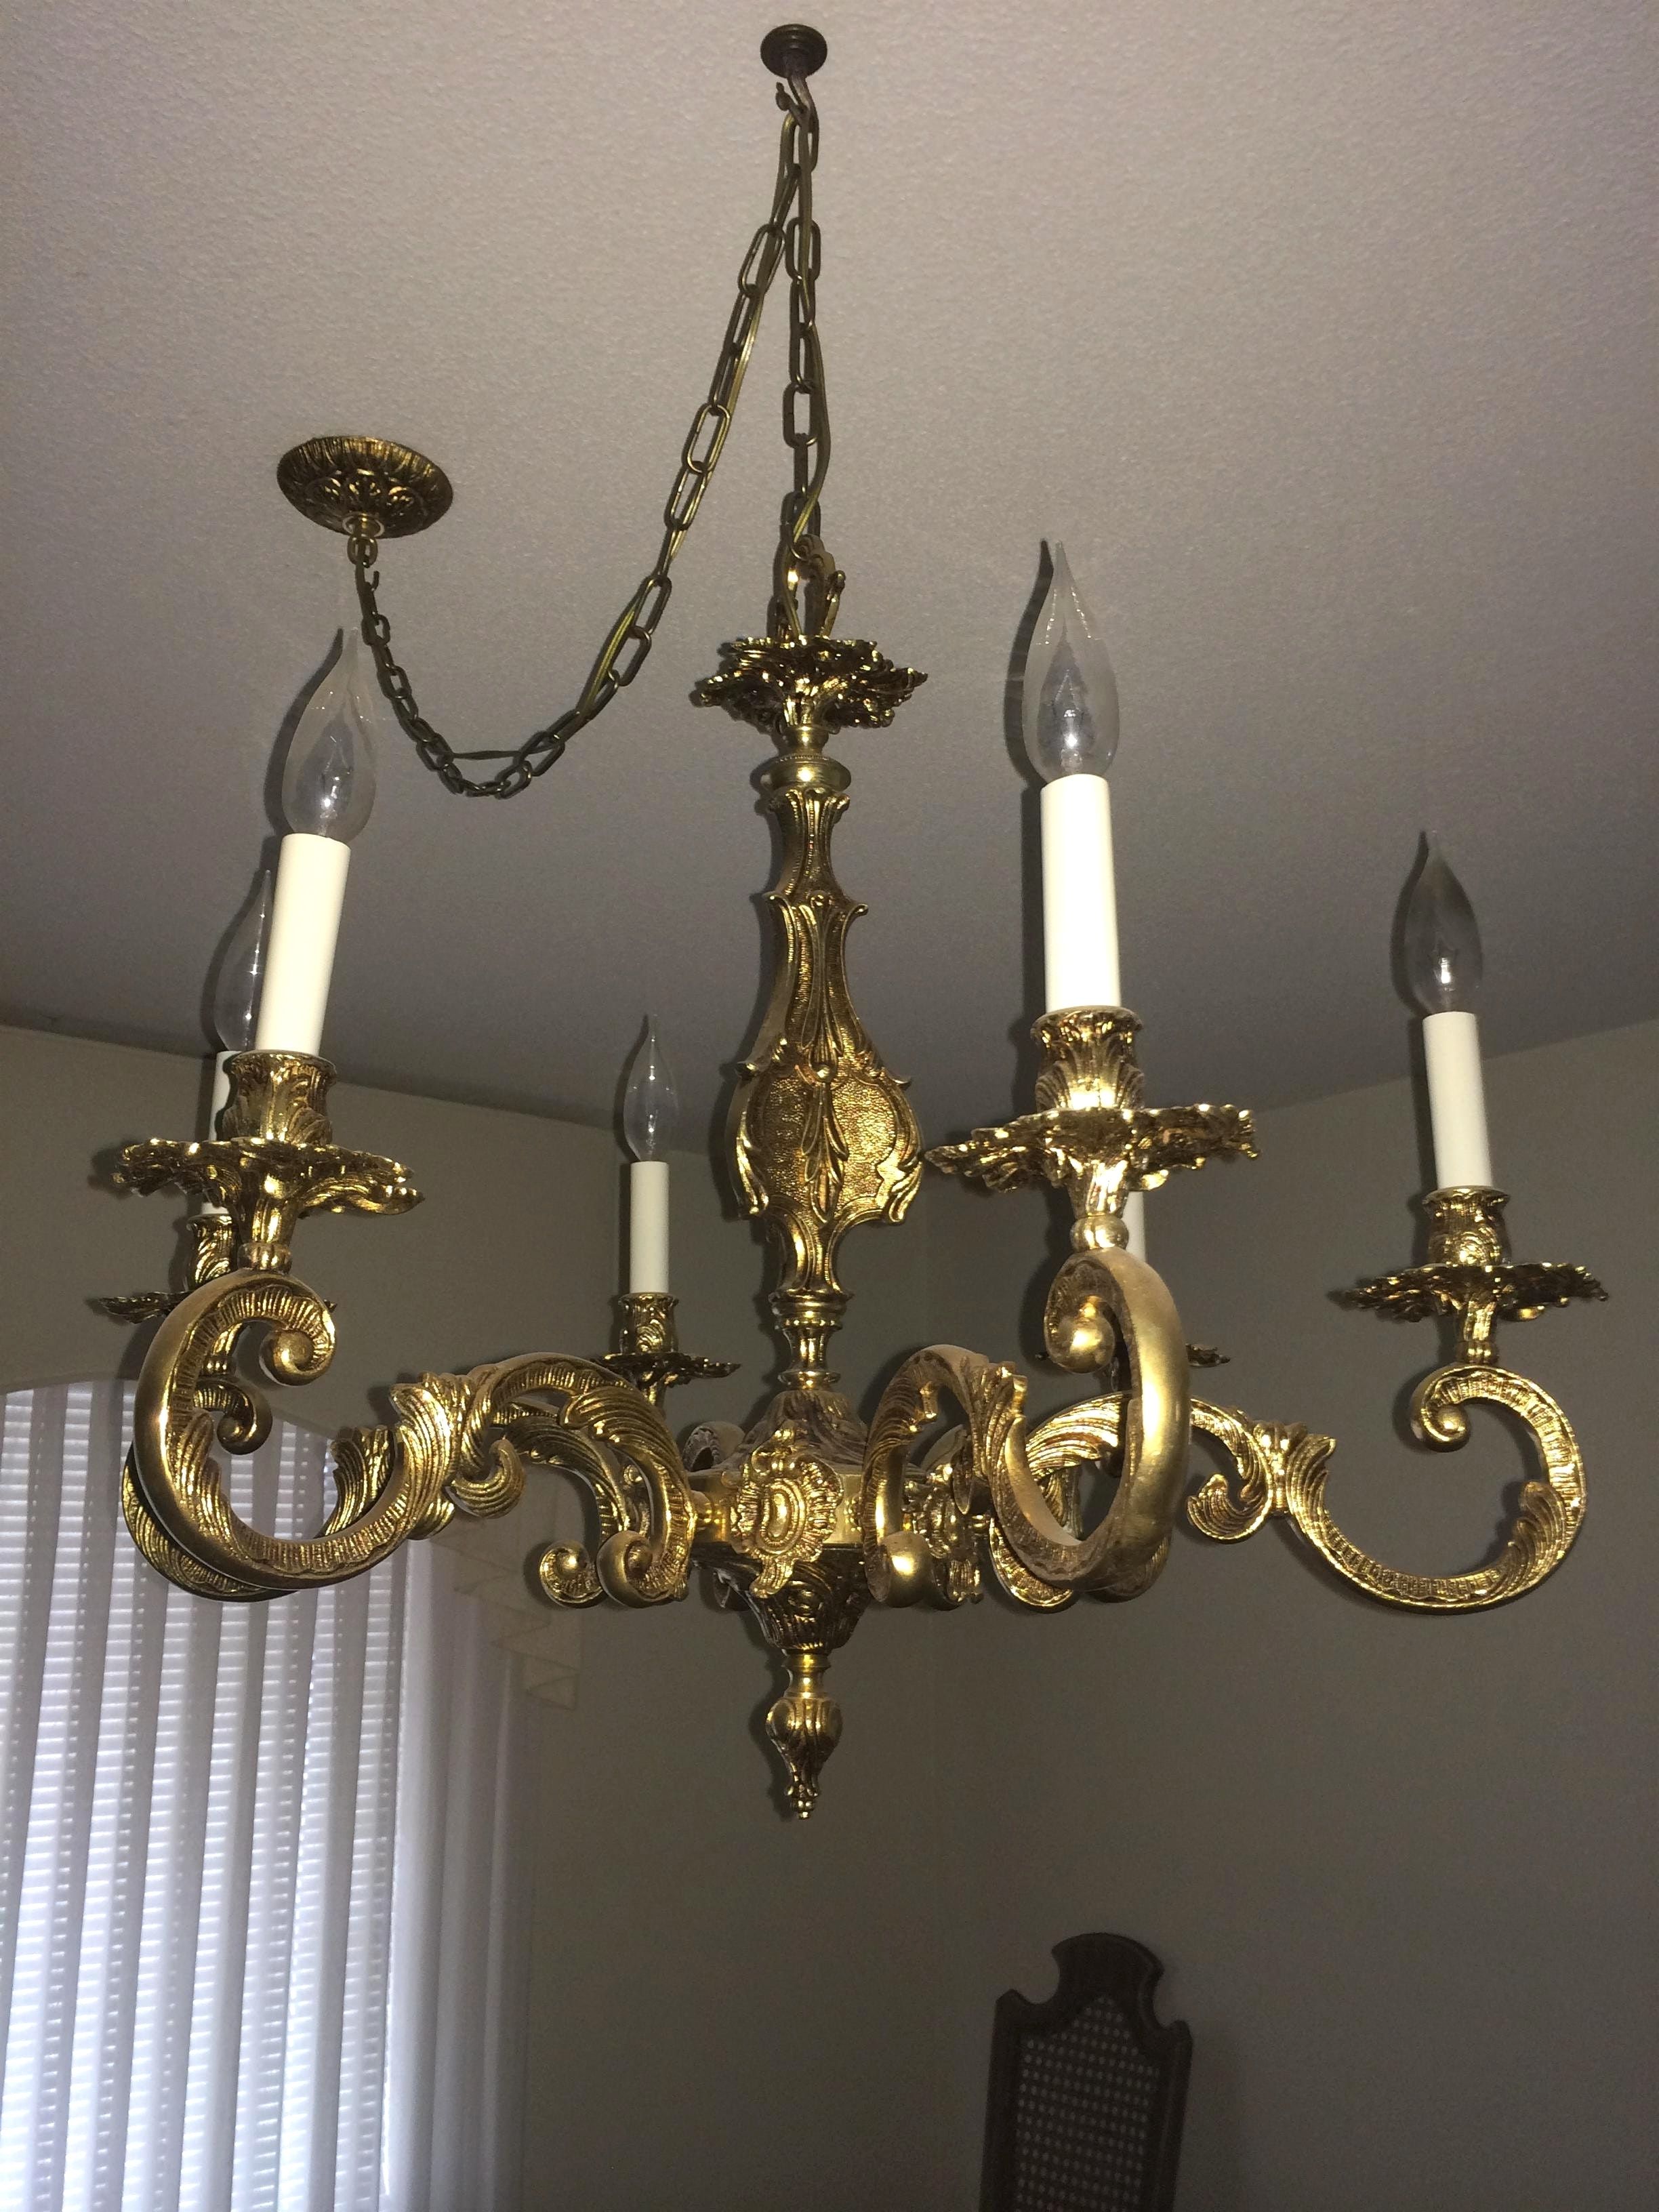 Old Brass Chandeliers In Current Light : Antique Brass Chandelier Value With Appraisal Instappraisal (View 11 of 15)